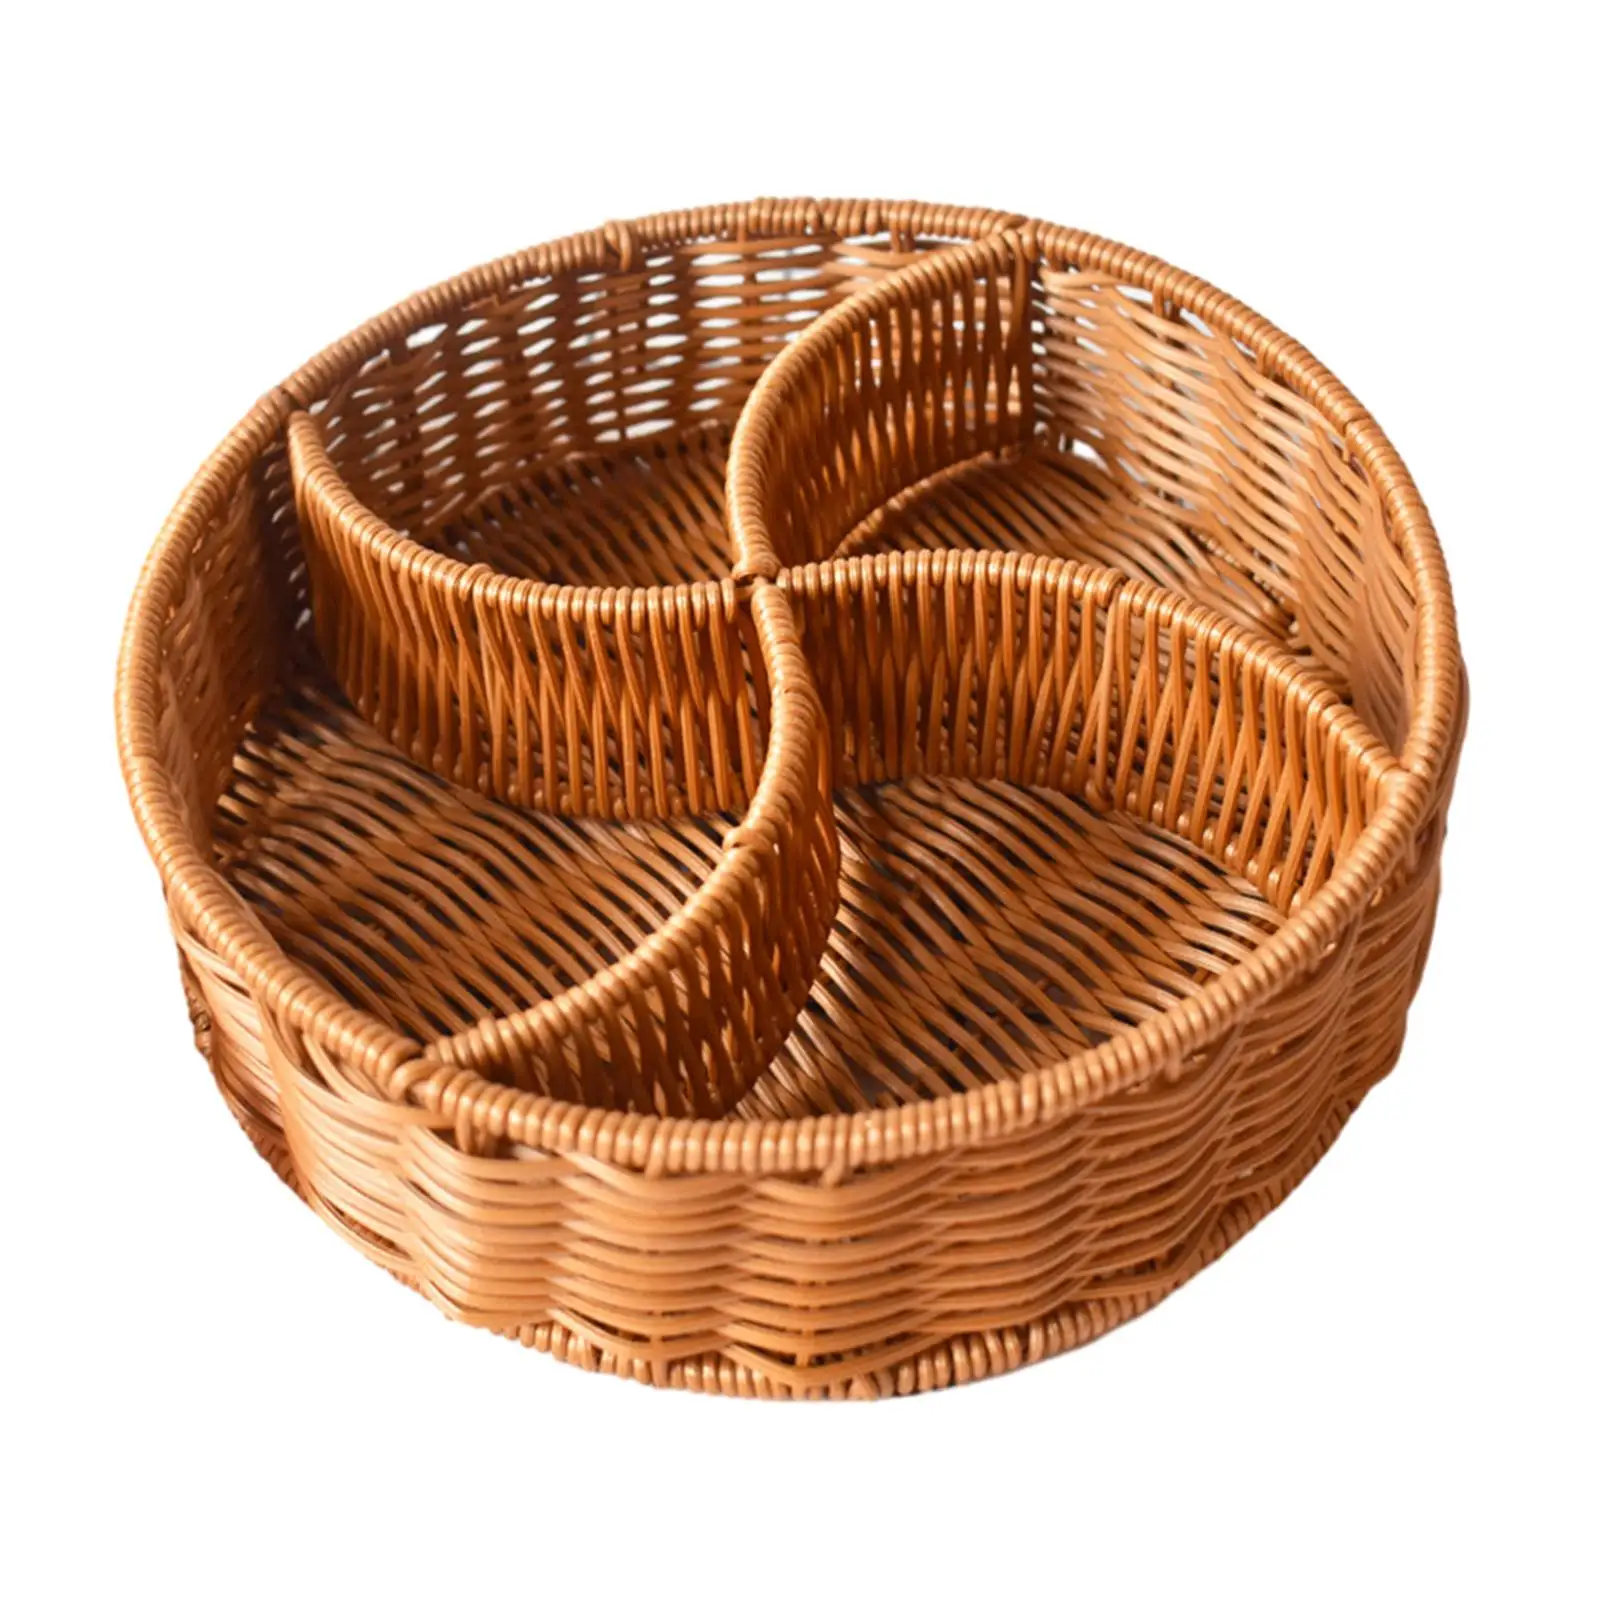 Hand Woven Serving Basket Candy Serving Tray Rustic Snack Platter Tray Farmhouse Home Décor for Hotel Pantry Dining